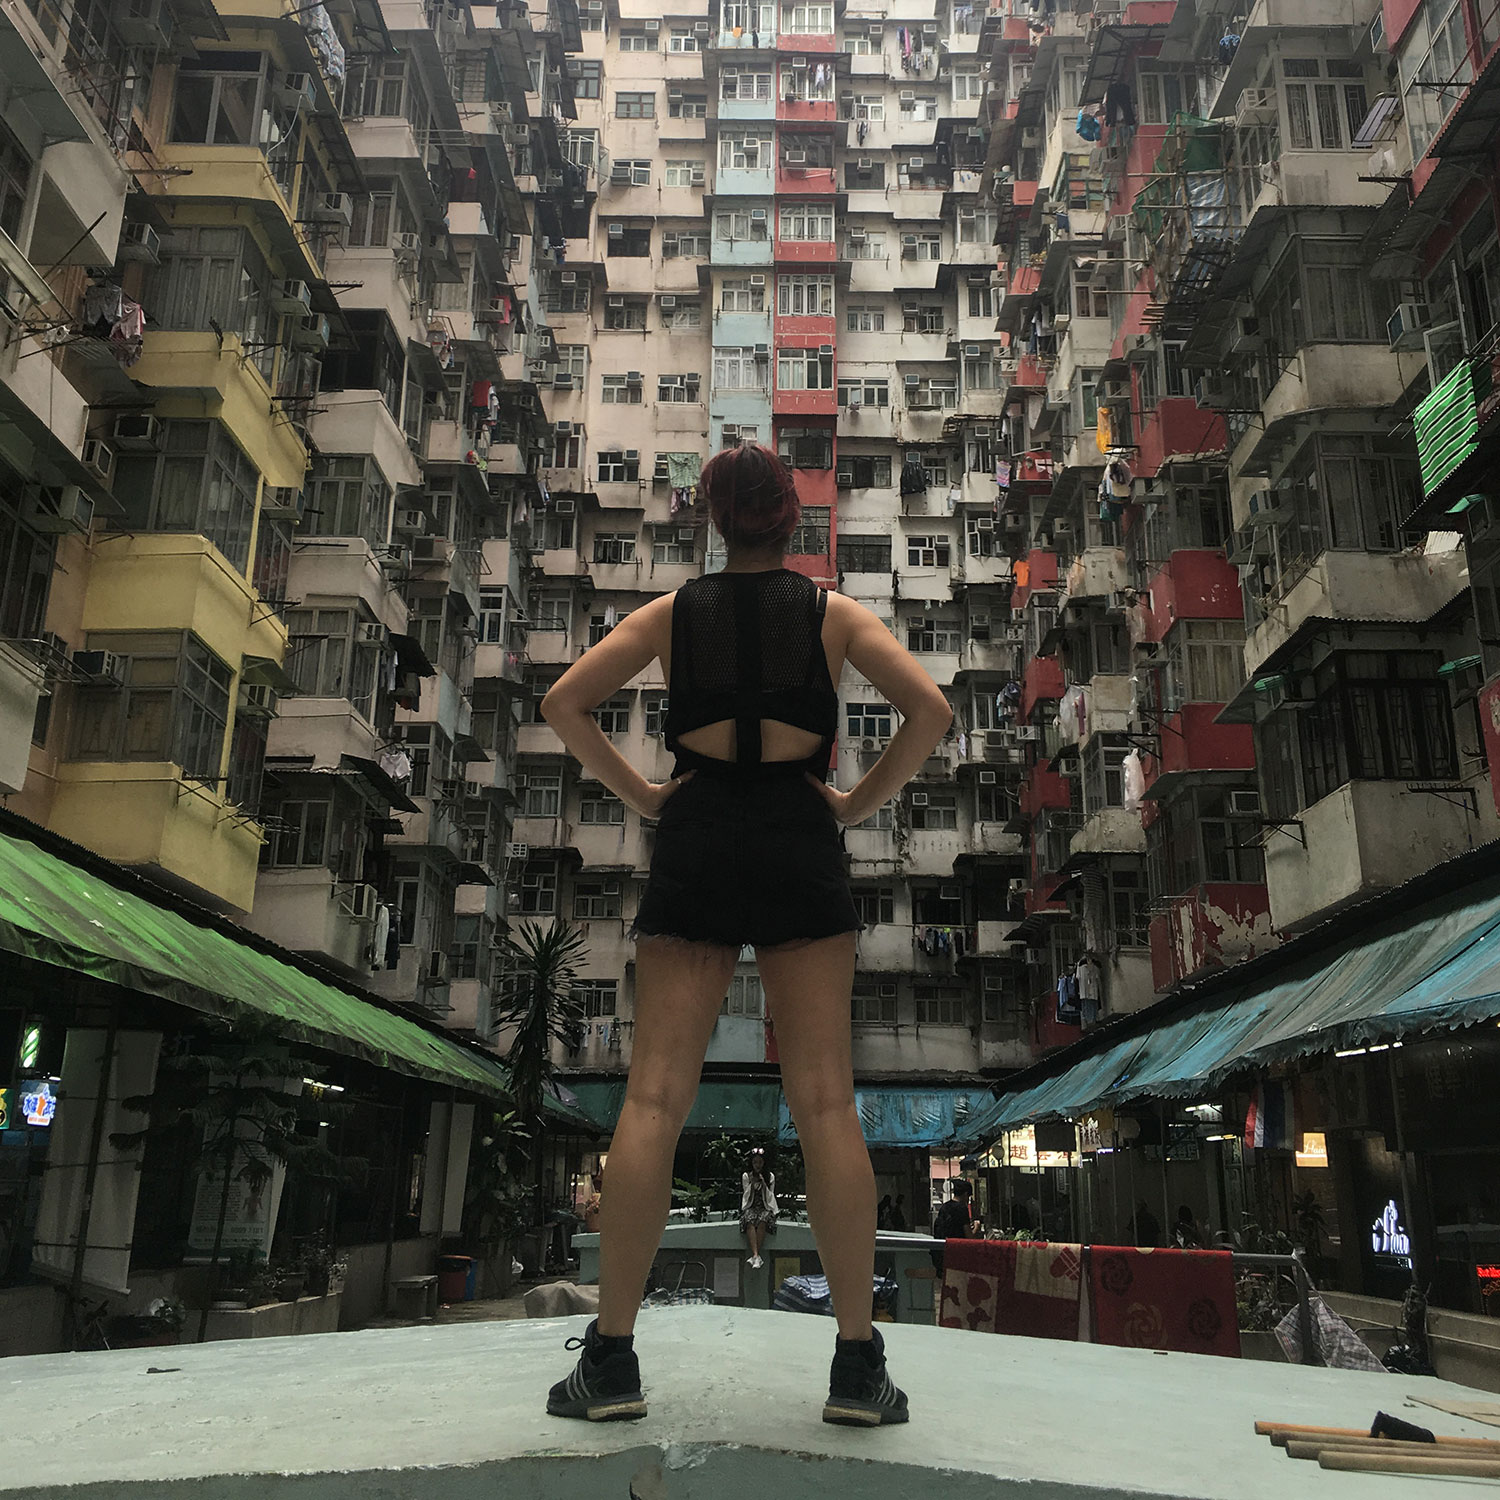 Student with high density apartment buildings in Hong Kong^empty:{ds__assetid^as_asset:asset_name}